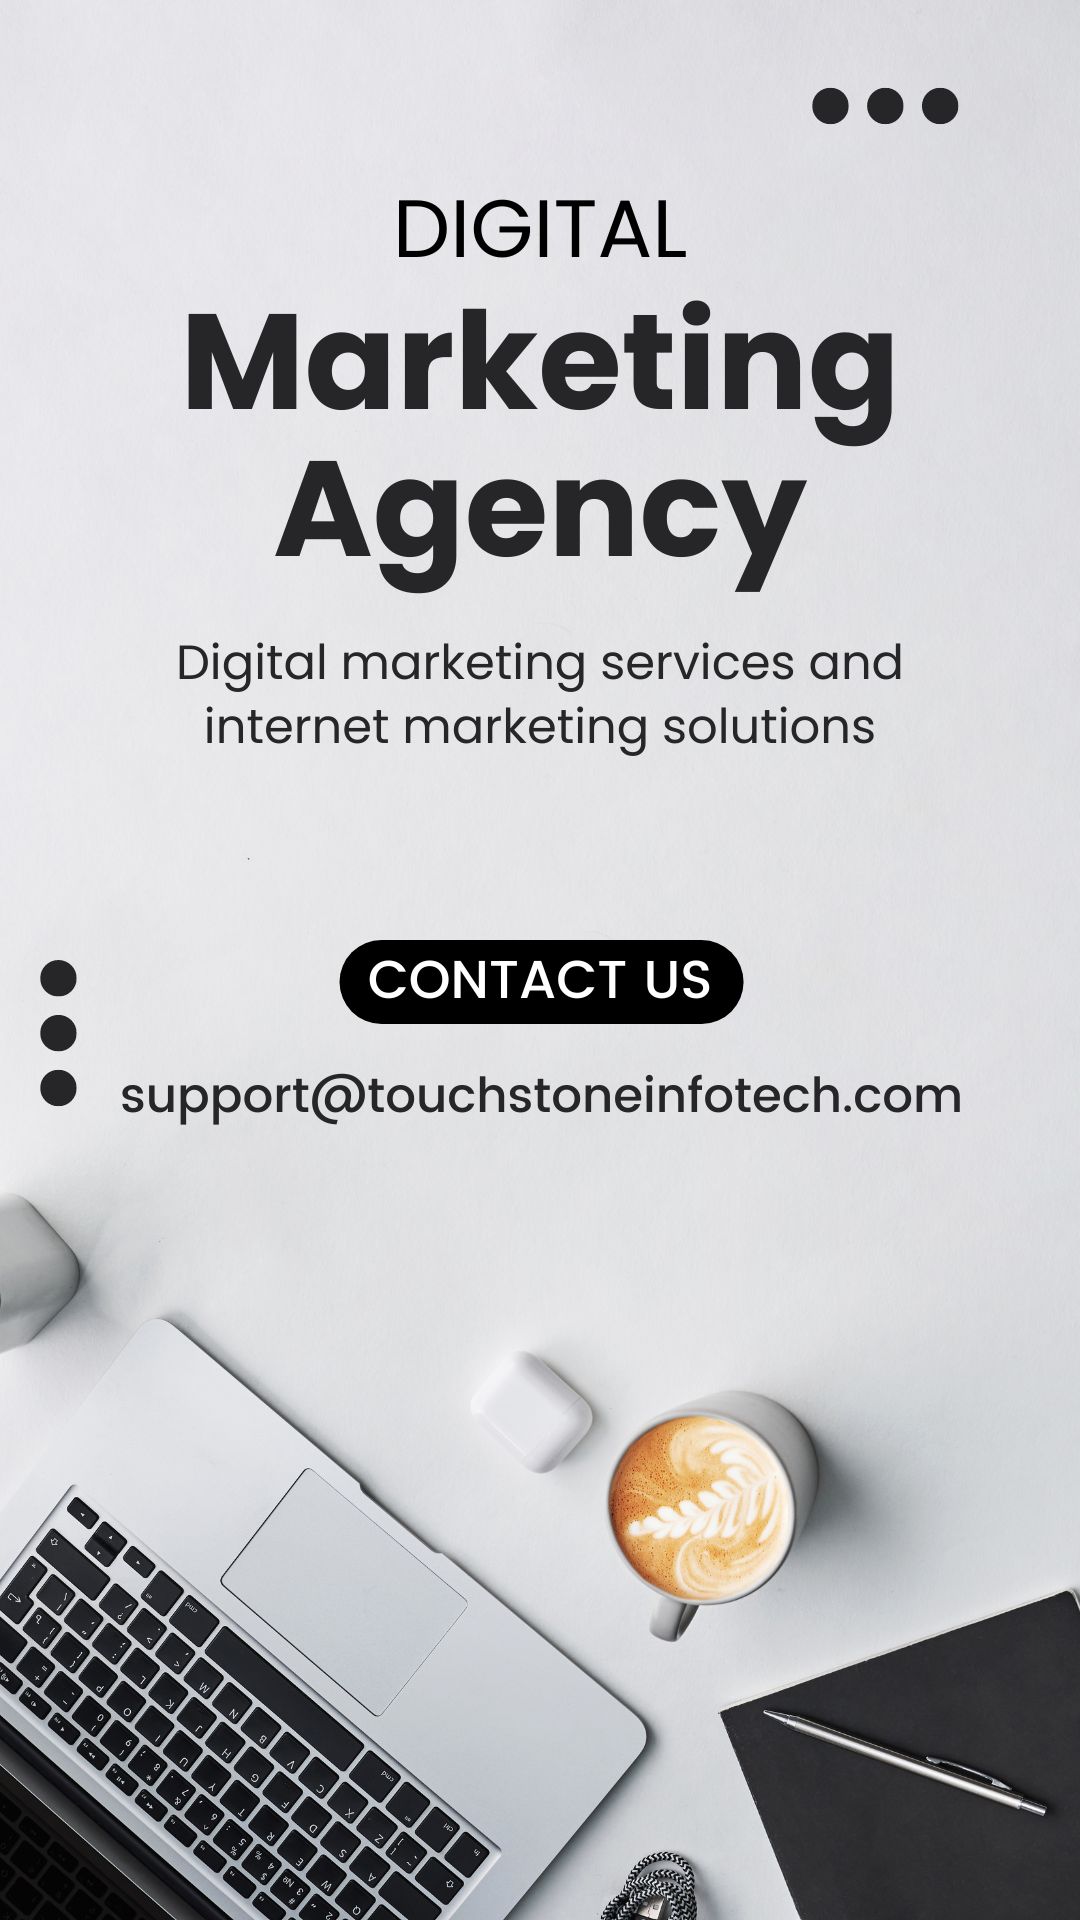 Digital marketing services and internet marketing solutions